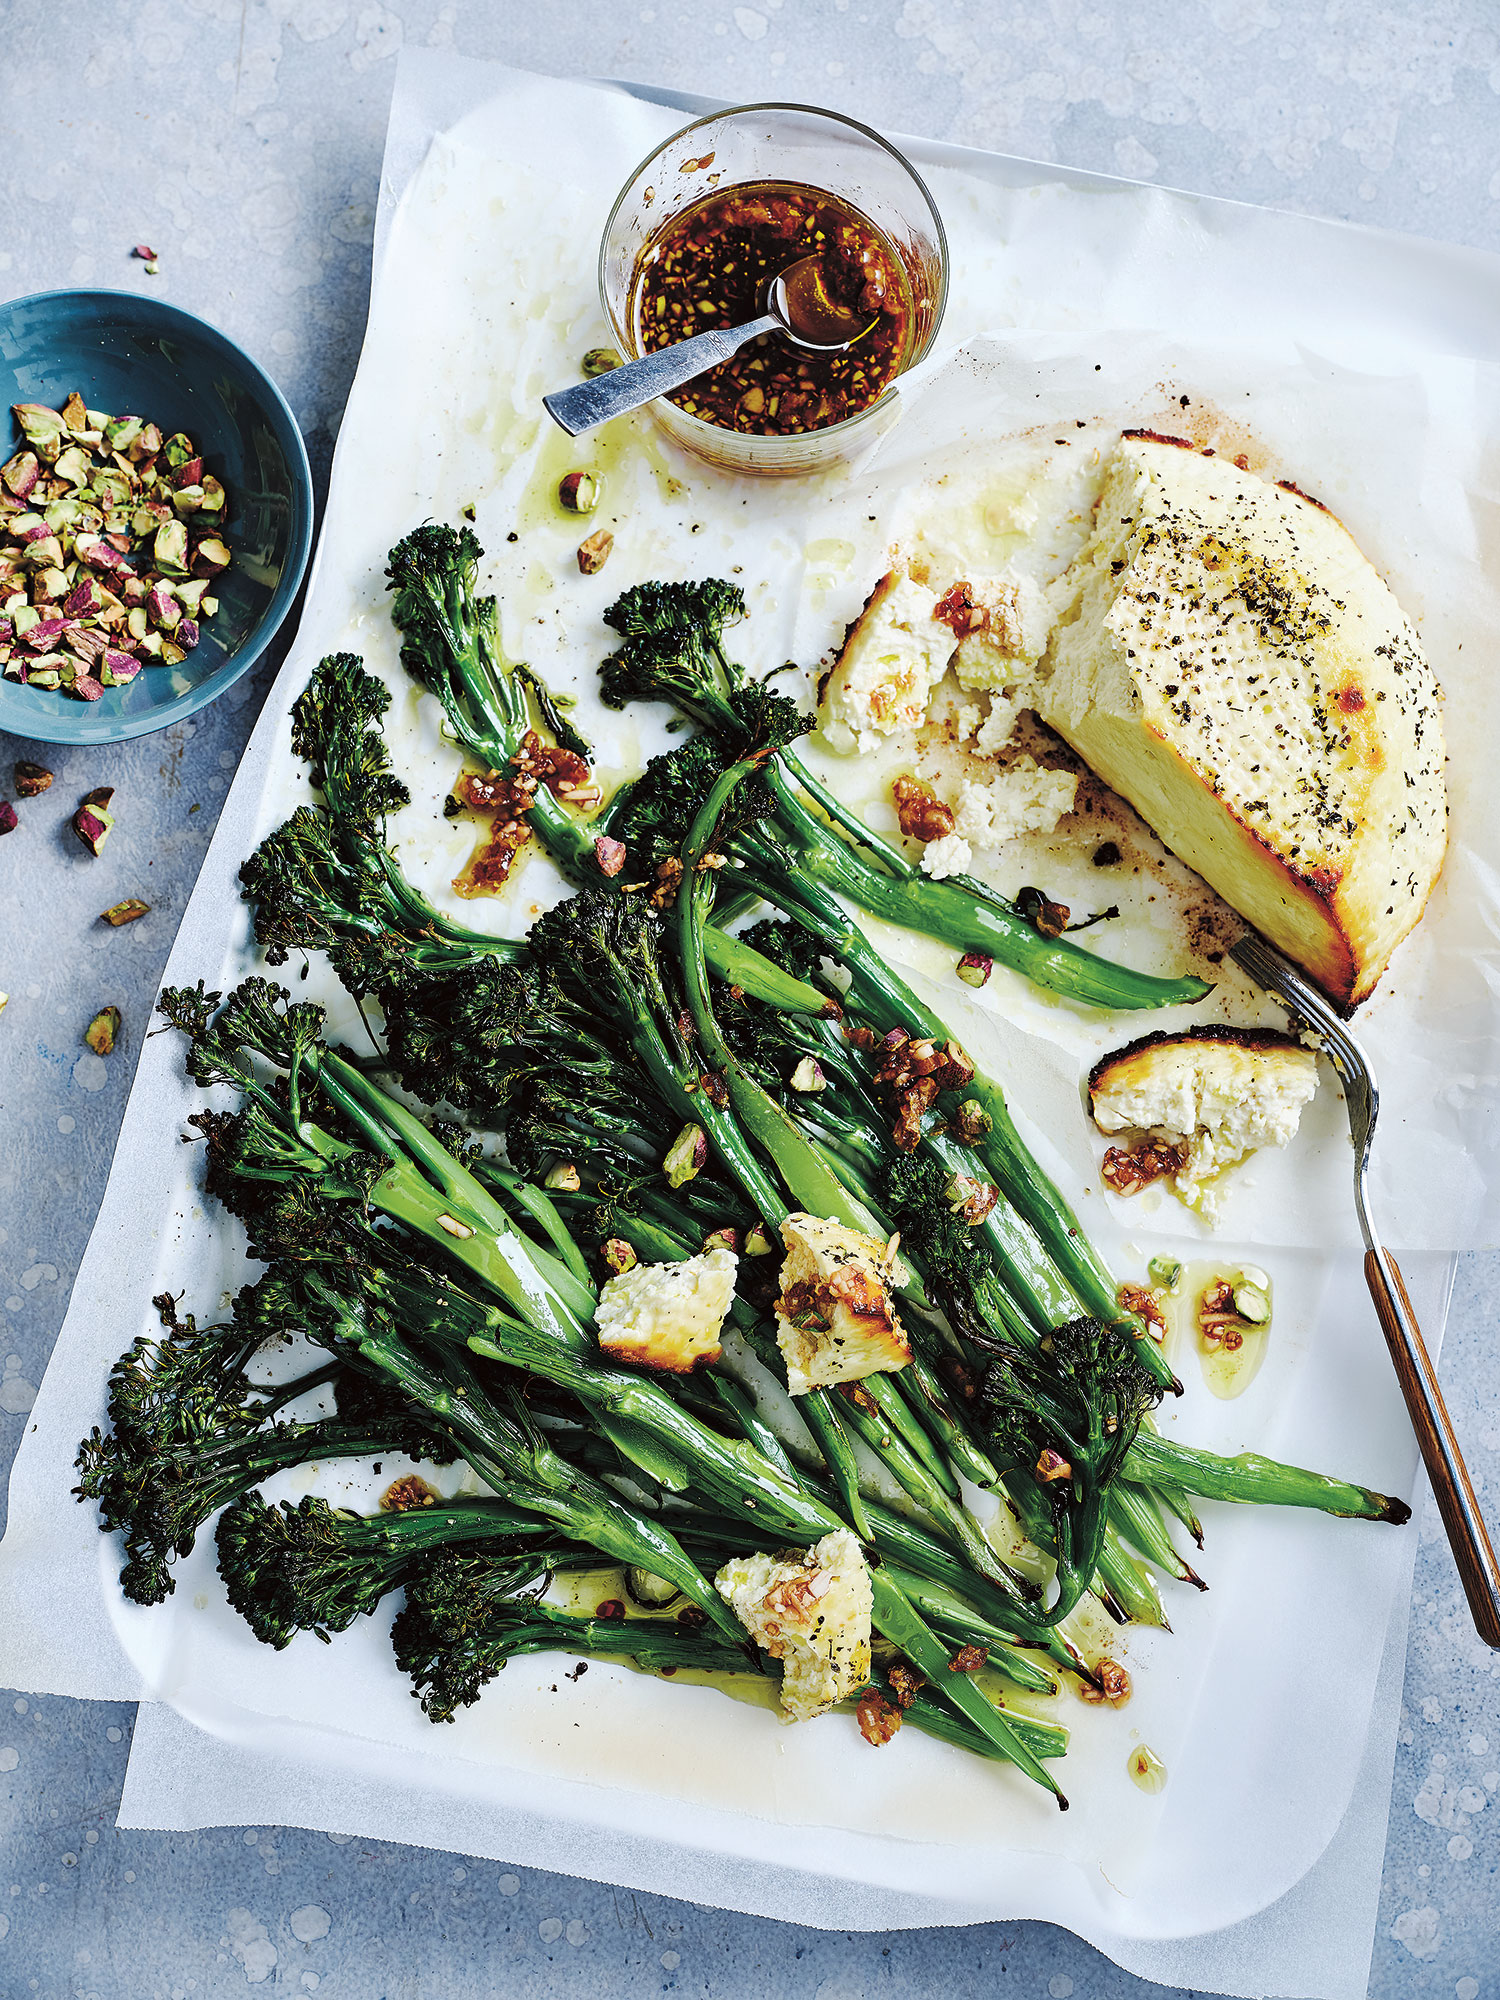 Roasted Broccolini Salad with Baked Ricotta from The Weeknight Cookbook